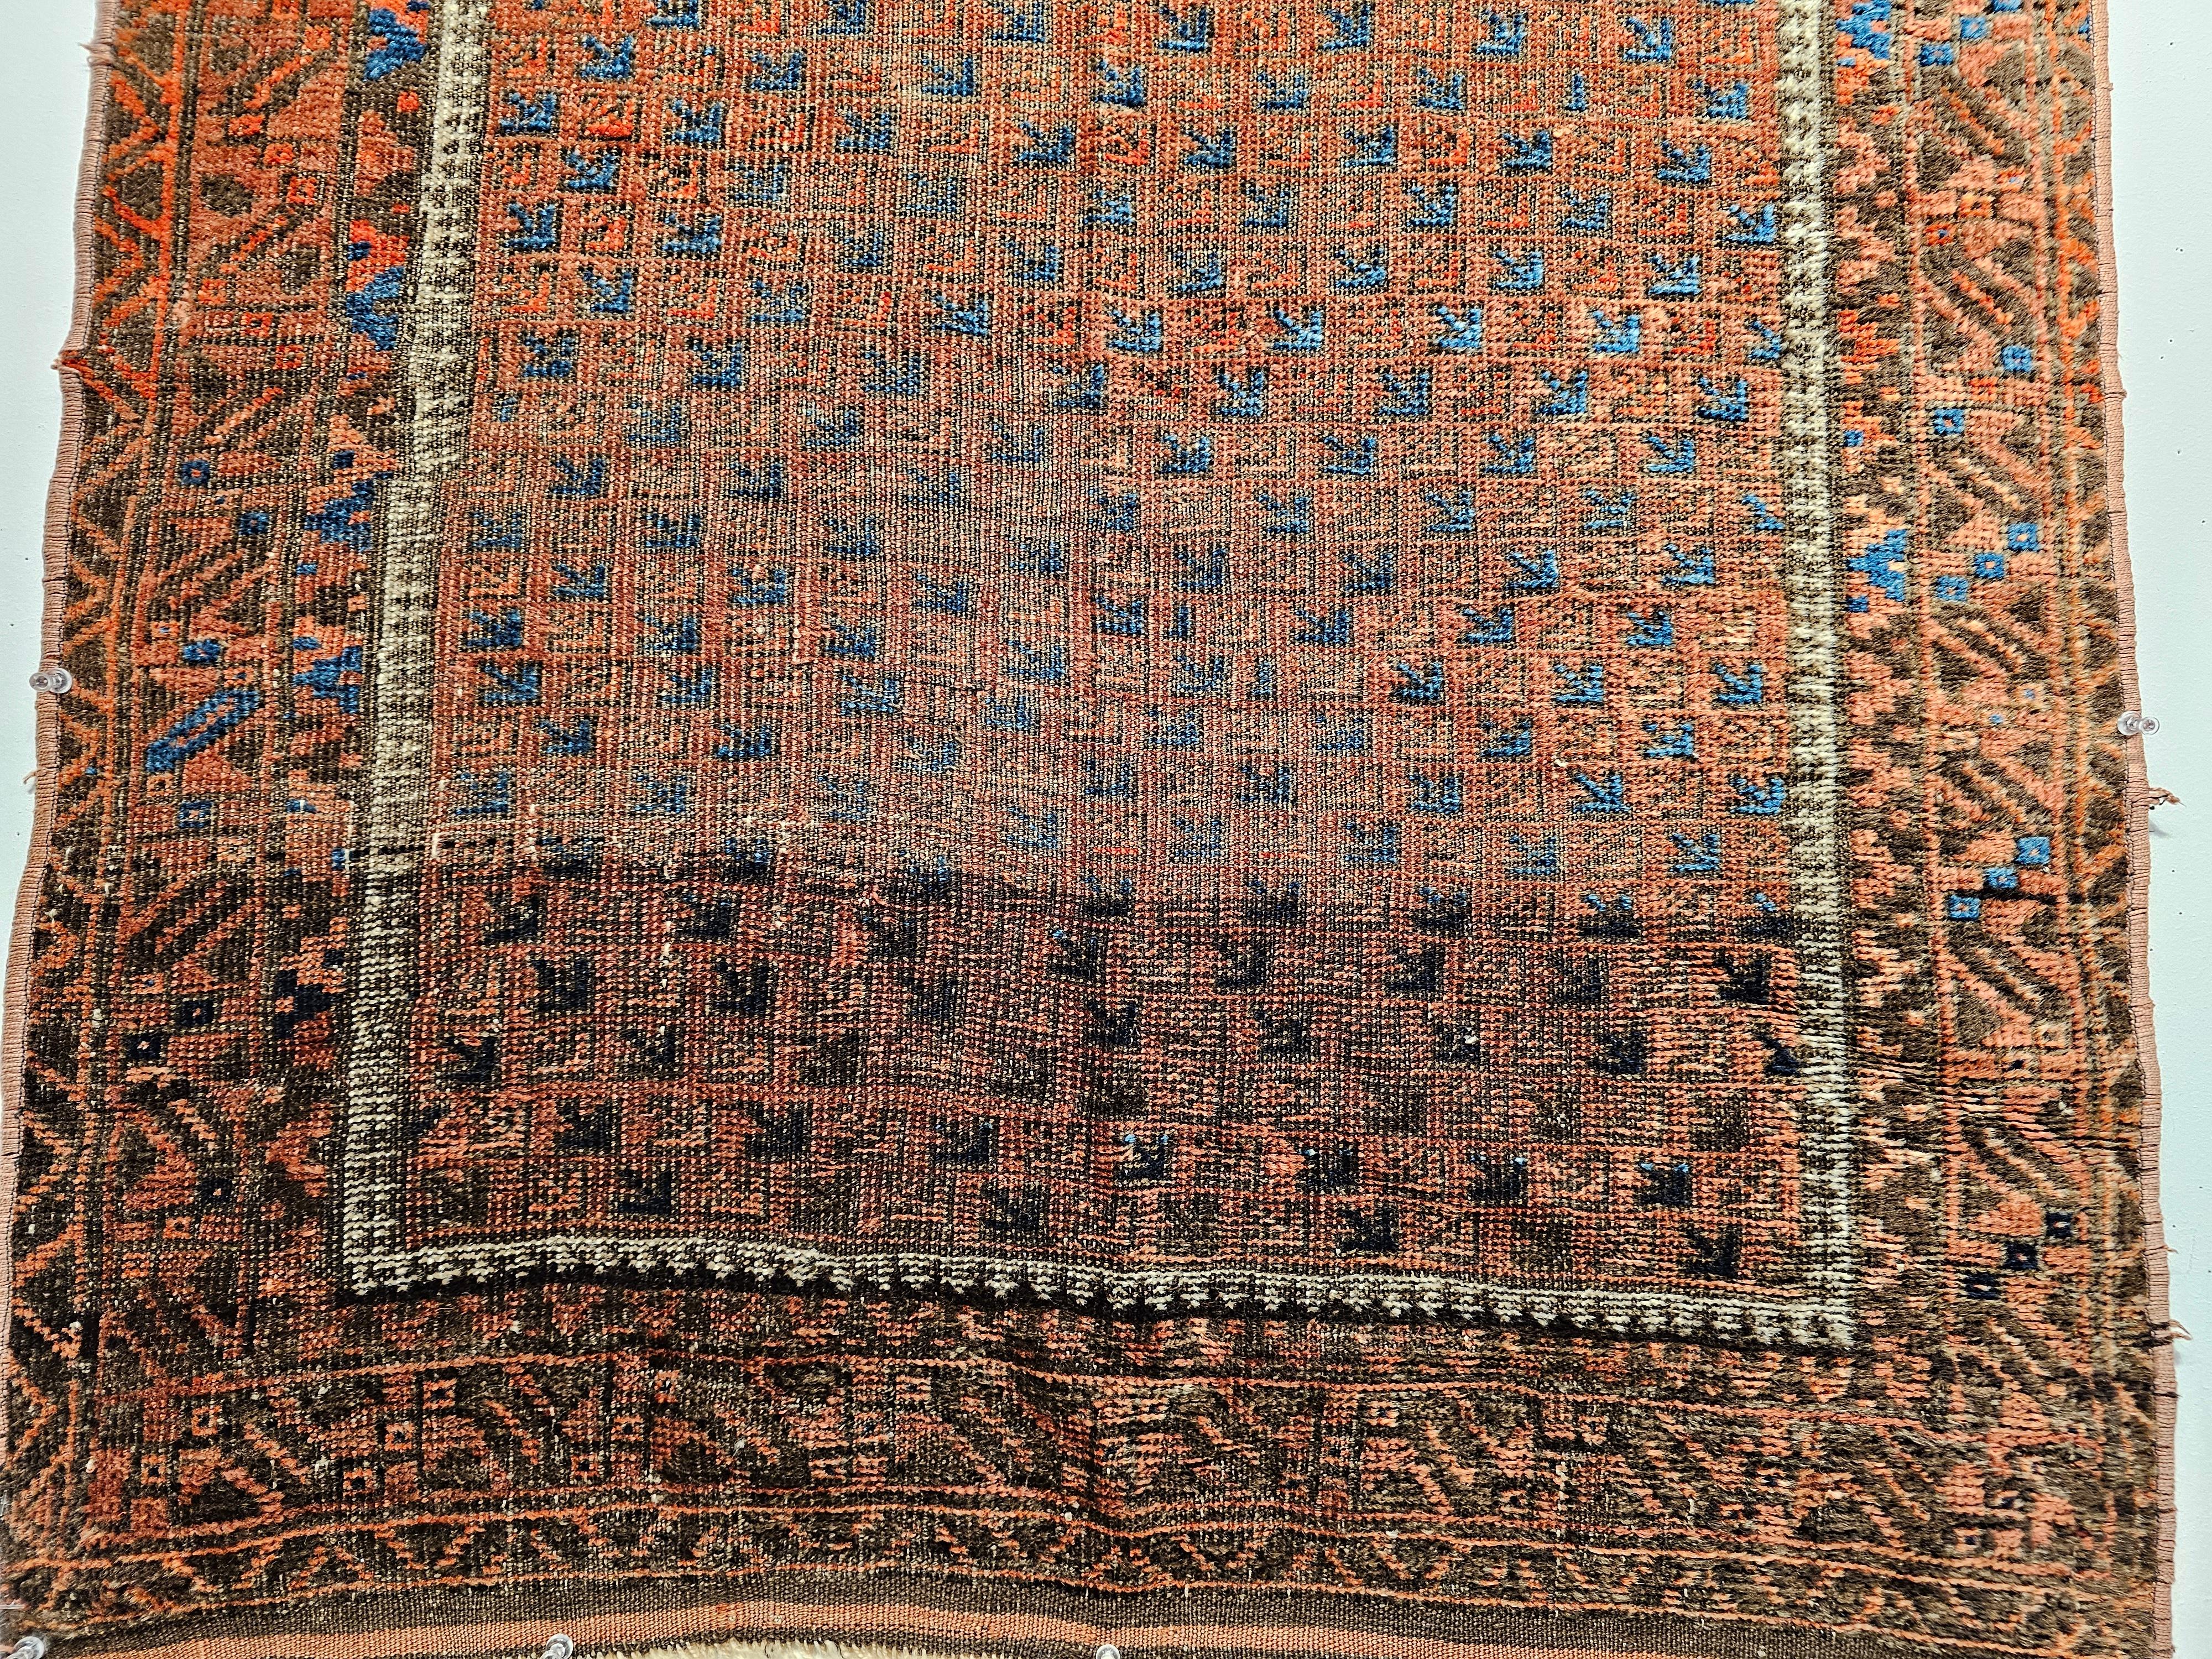 19th Century Turkmen Yomut Area Rug in Prayer Pattern in Dark Red, French Blue In Good Condition For Sale In Barrington, IL